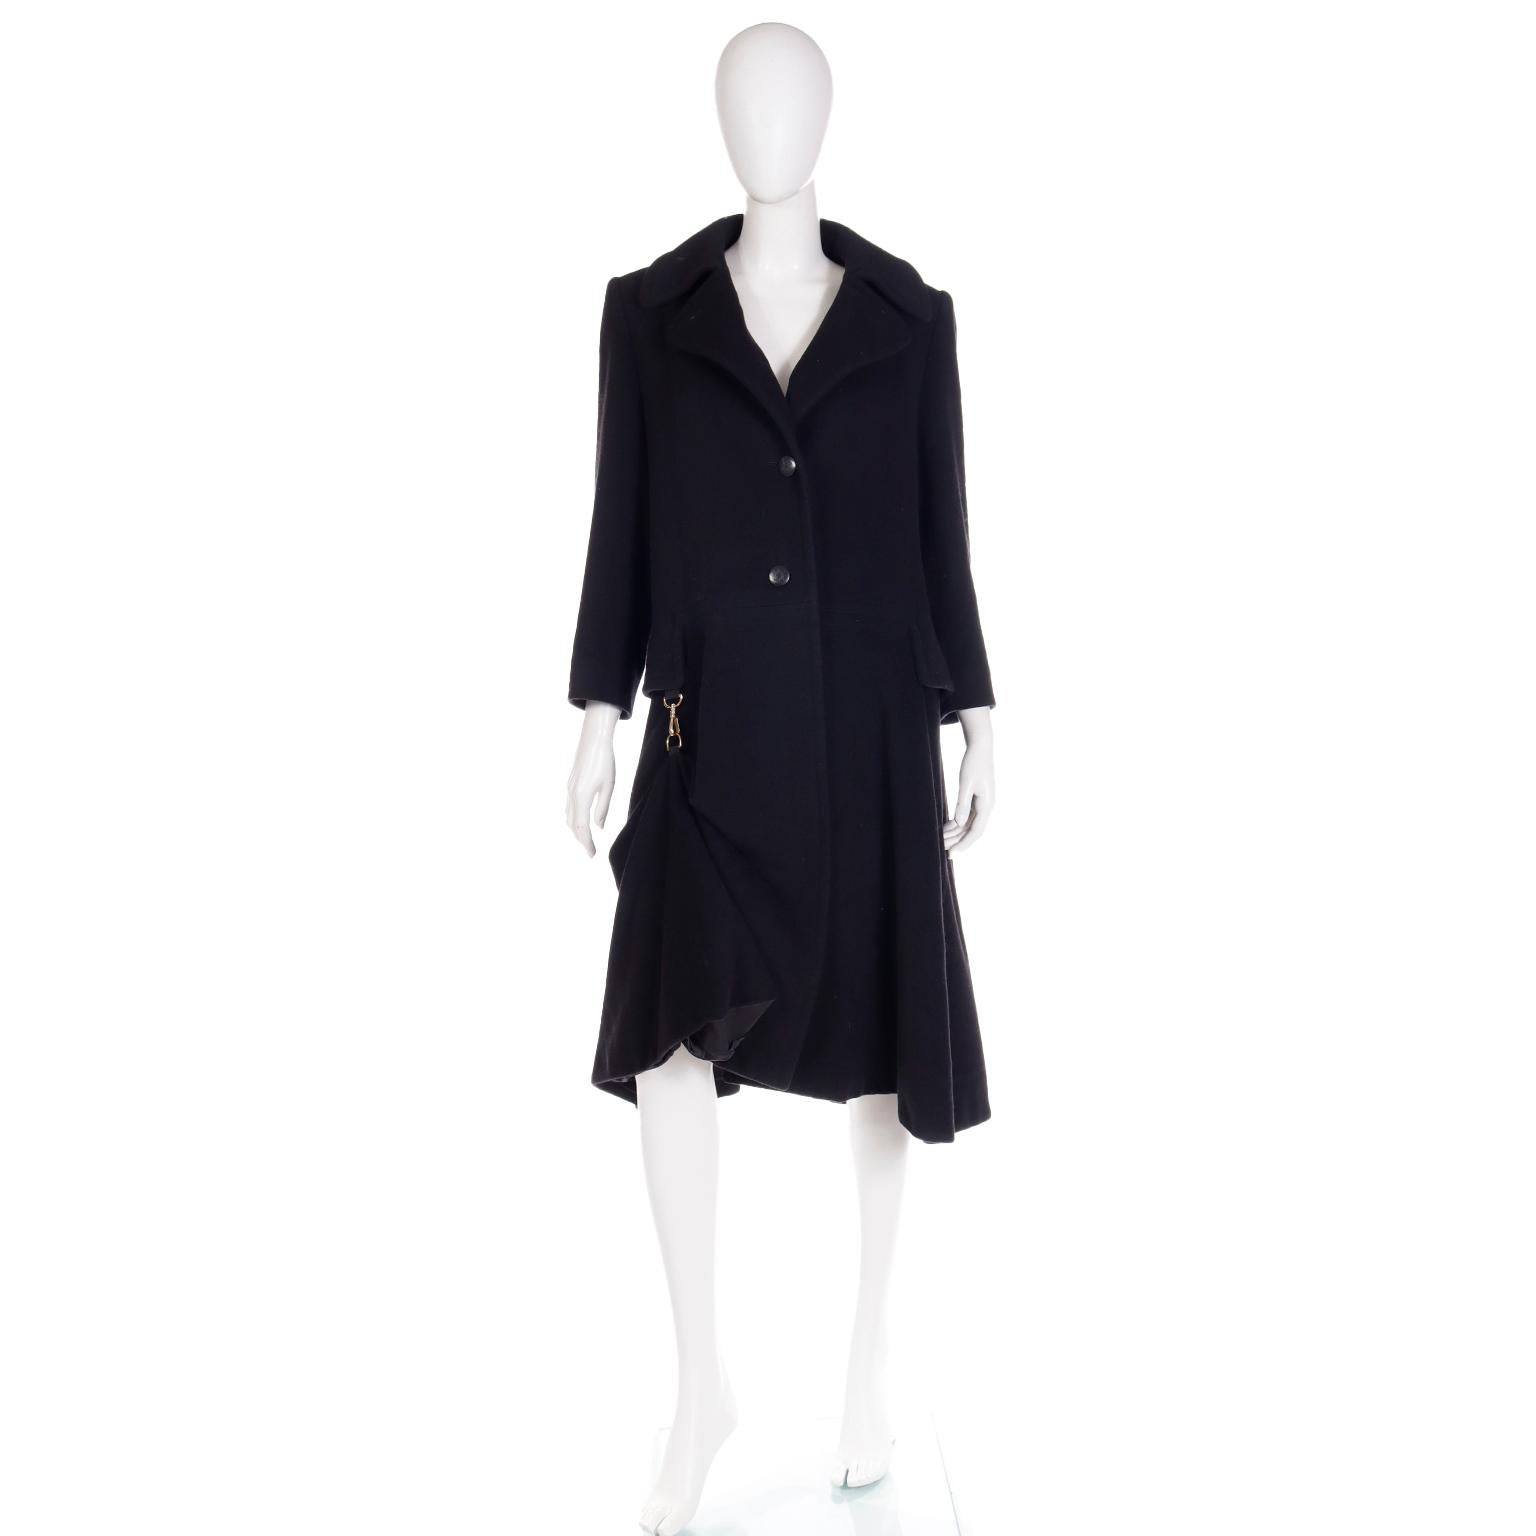 This vintage Hermes black coat is in 100% cashmere and is in such a unique style!  The coat has a fuller skirted lower portion with an optional toggle closure at one side that creates an asymmetrical hemline when attached!  The coat has a collar,